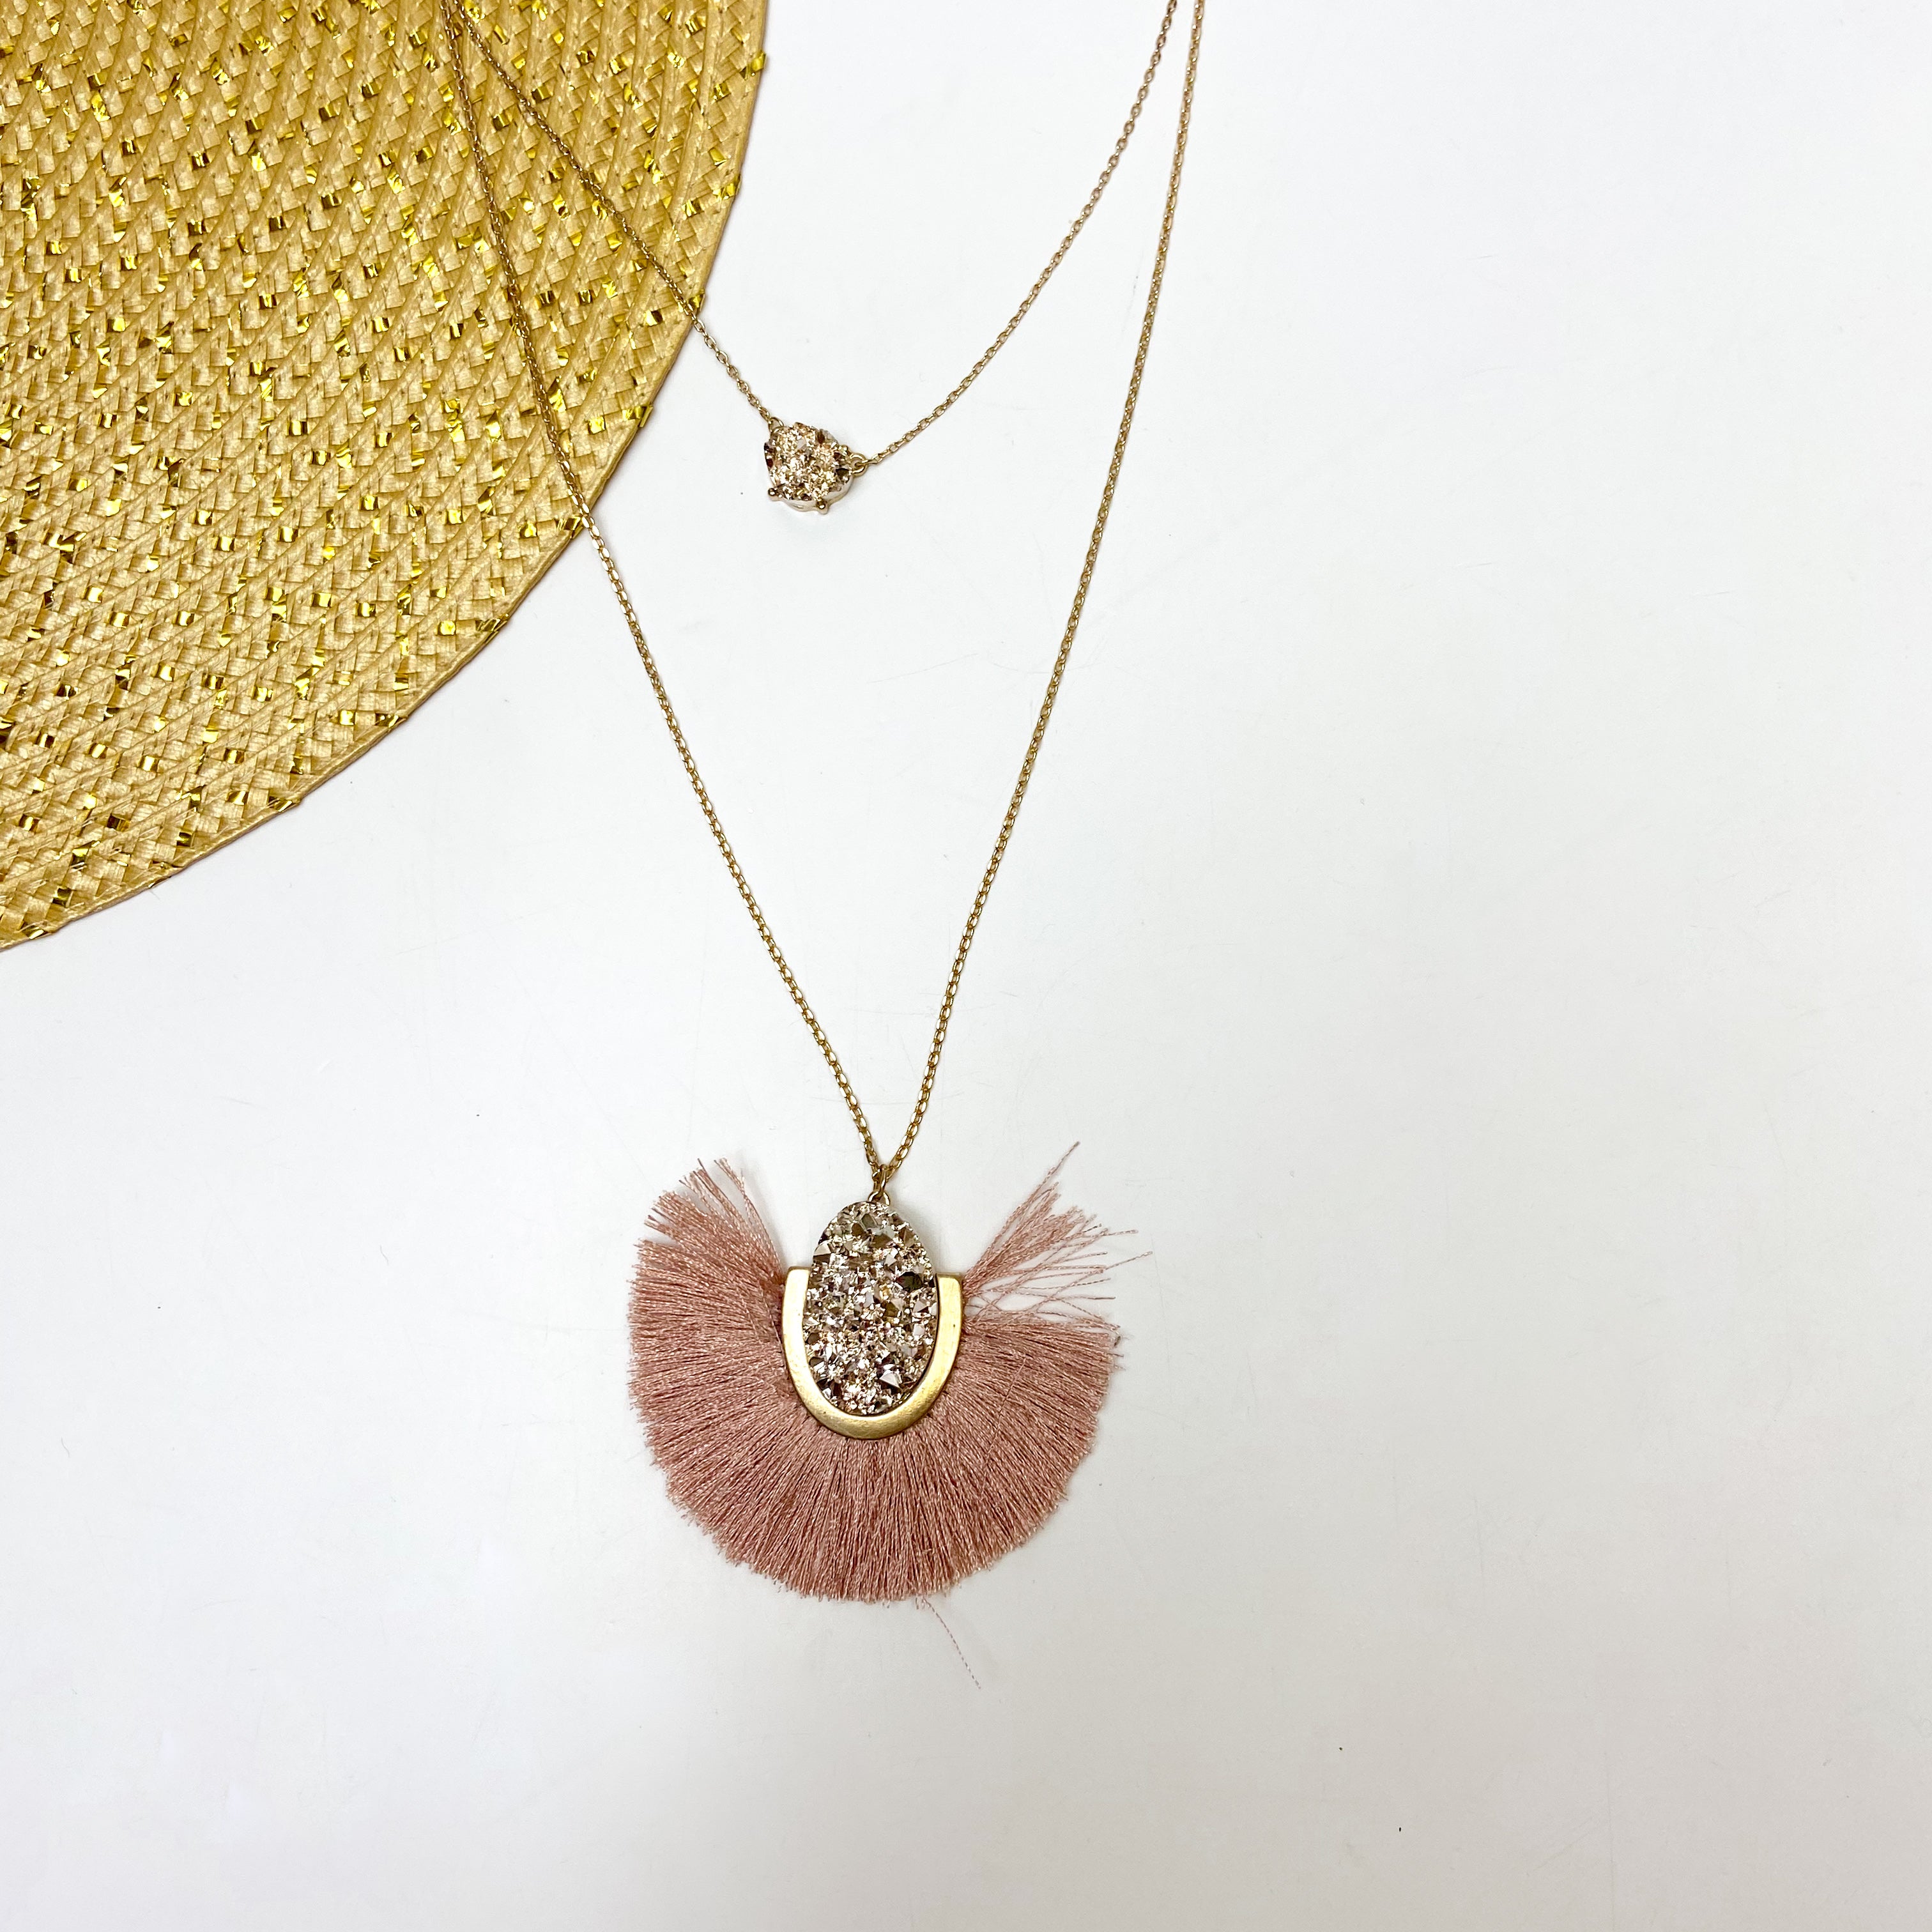 DOUBLE LAYER NECKLACE WITH SMALL DRUZY STONE AND OVAL DRUZY STONE WITH FRINGE TRIM IN DUSTY ROSE PINK | ONLY 1 LEFT!